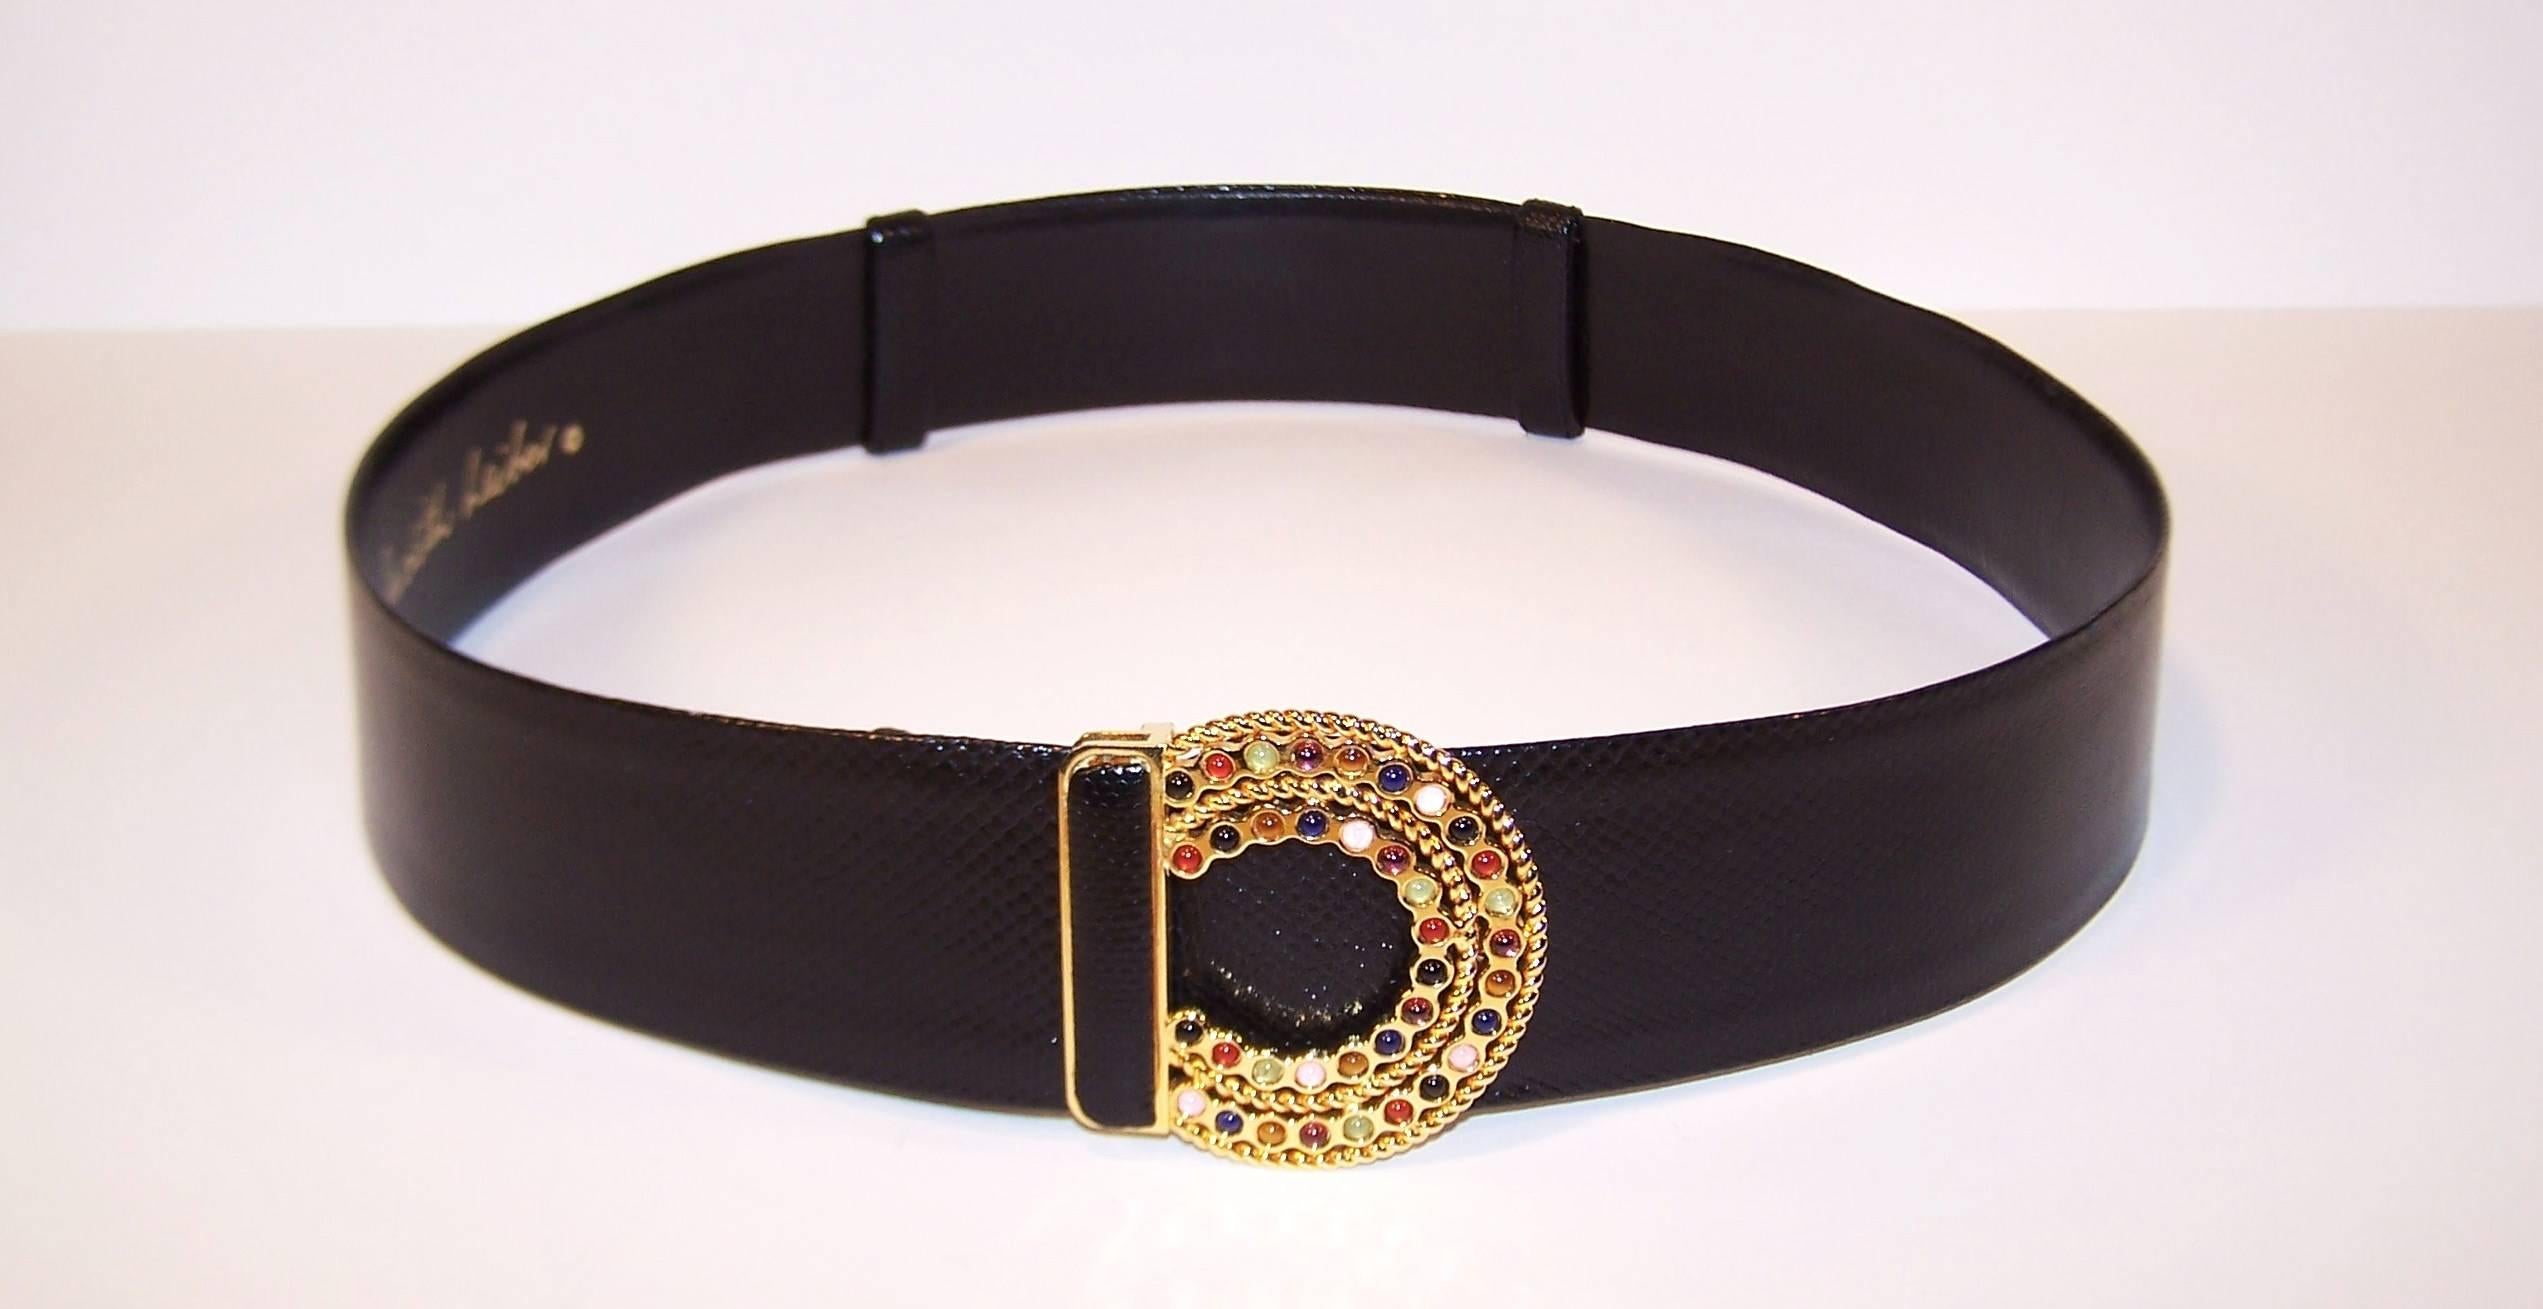 C.1990 Judith Leiber Black Lizard Belt With Cabochon Bejeweled Buckle 2